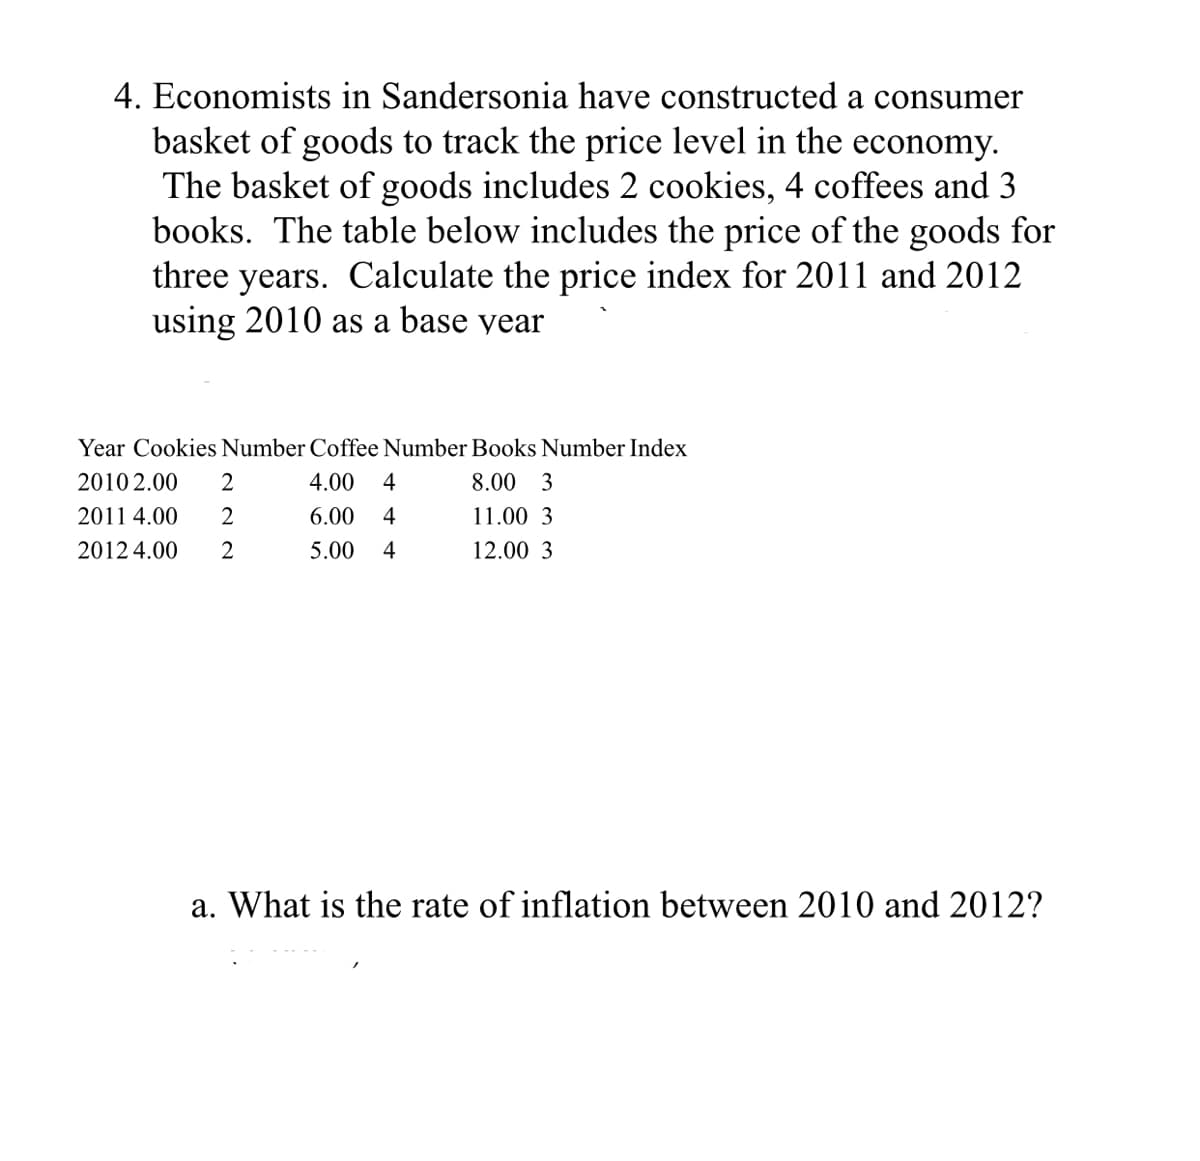 4. Economists in Sandersonia have constructed a consumer
basket of goods to track the price level in the economy.
The basket of goods includes 2 cookies, 4 coffees and 3
books. The table below includes the price of the goods for
three years. Calculate the price index for 2011 and 2012
using 2010 as a base year
Year Cookies Number Coffee Number Books Number Index
2010 2.00
2
4.00
4
8.00 3
2011 4.00
6.00
4
11.00 3
2012 4.00
2
5.00
4
12.00 3
a. What is the rate of inflation between 2010 and 2012?
